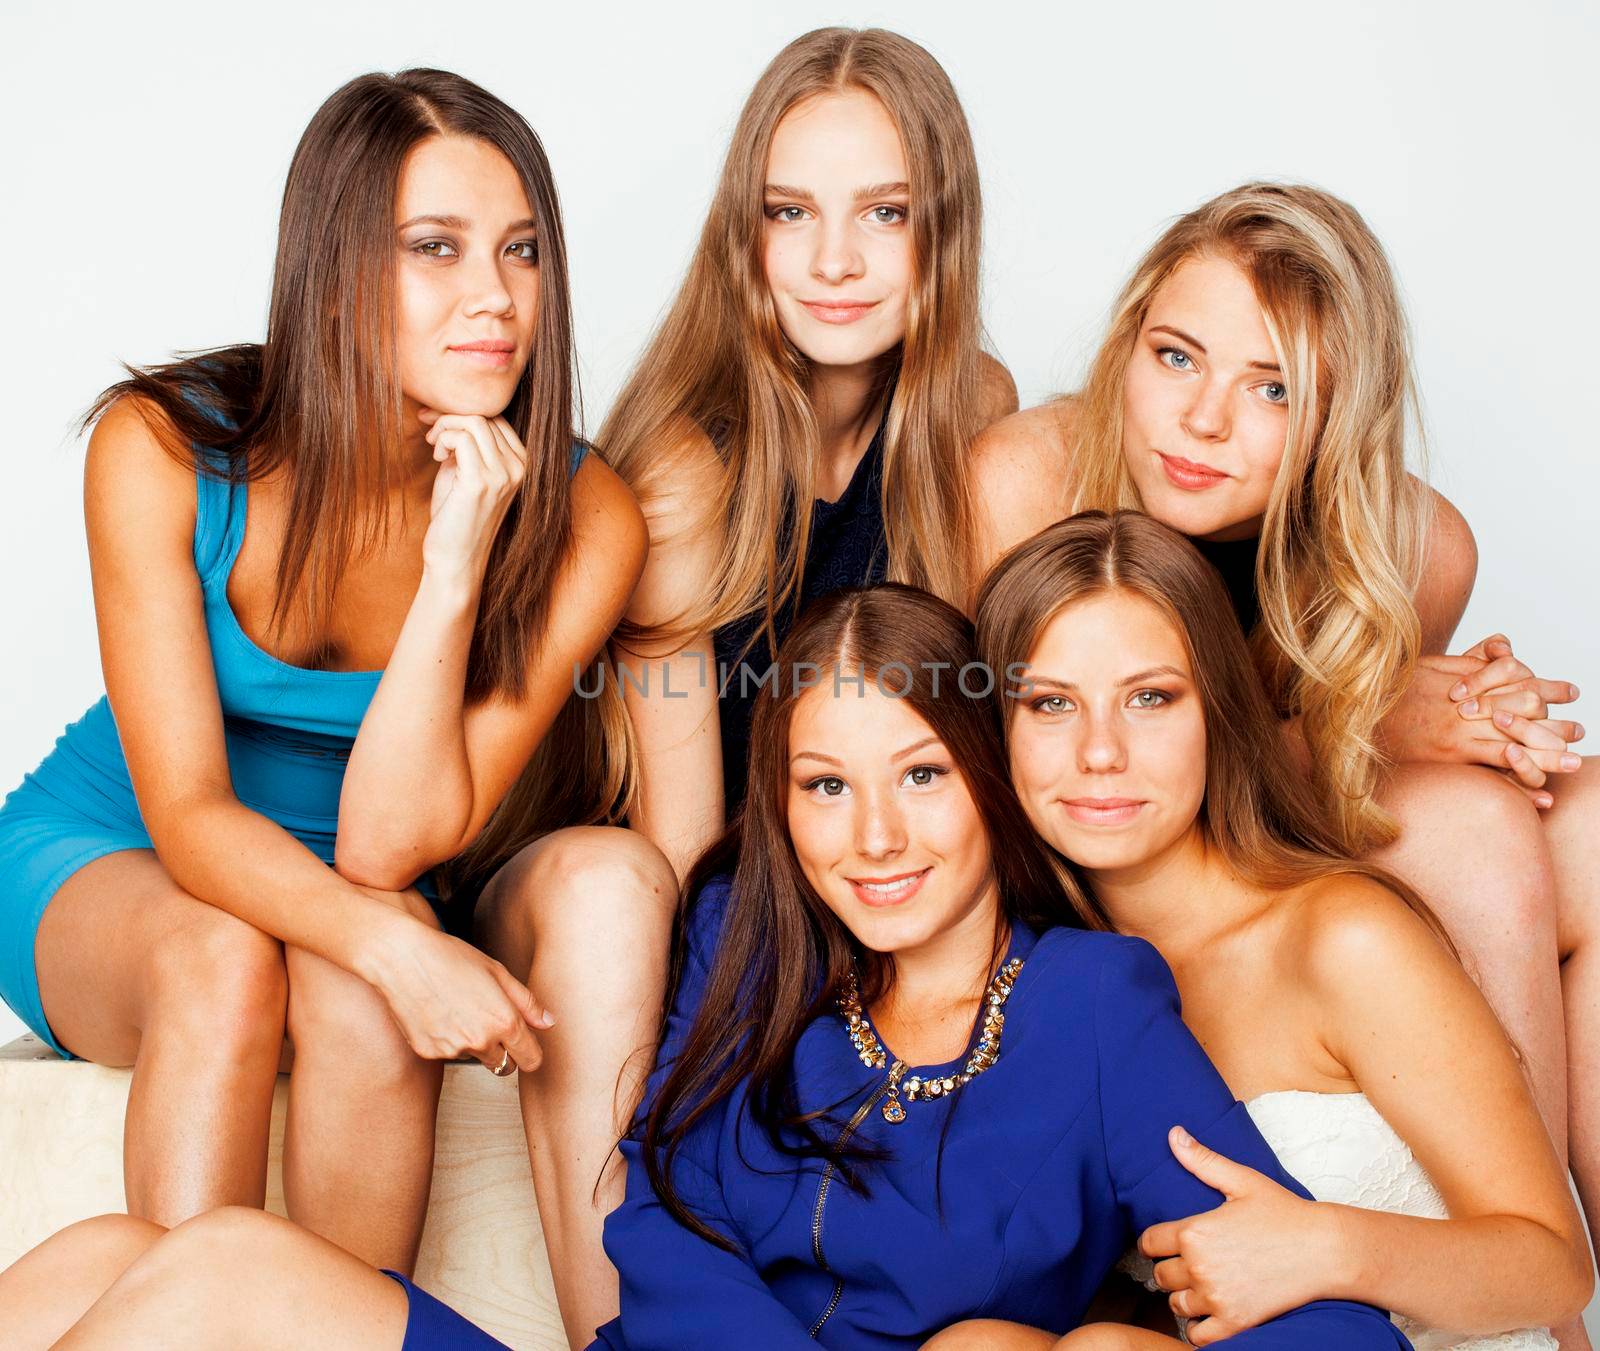 many girlfriends hugging celebration on white background, smiling talking chat, girl next door close up wondering sweety group, lifestyle real modern people